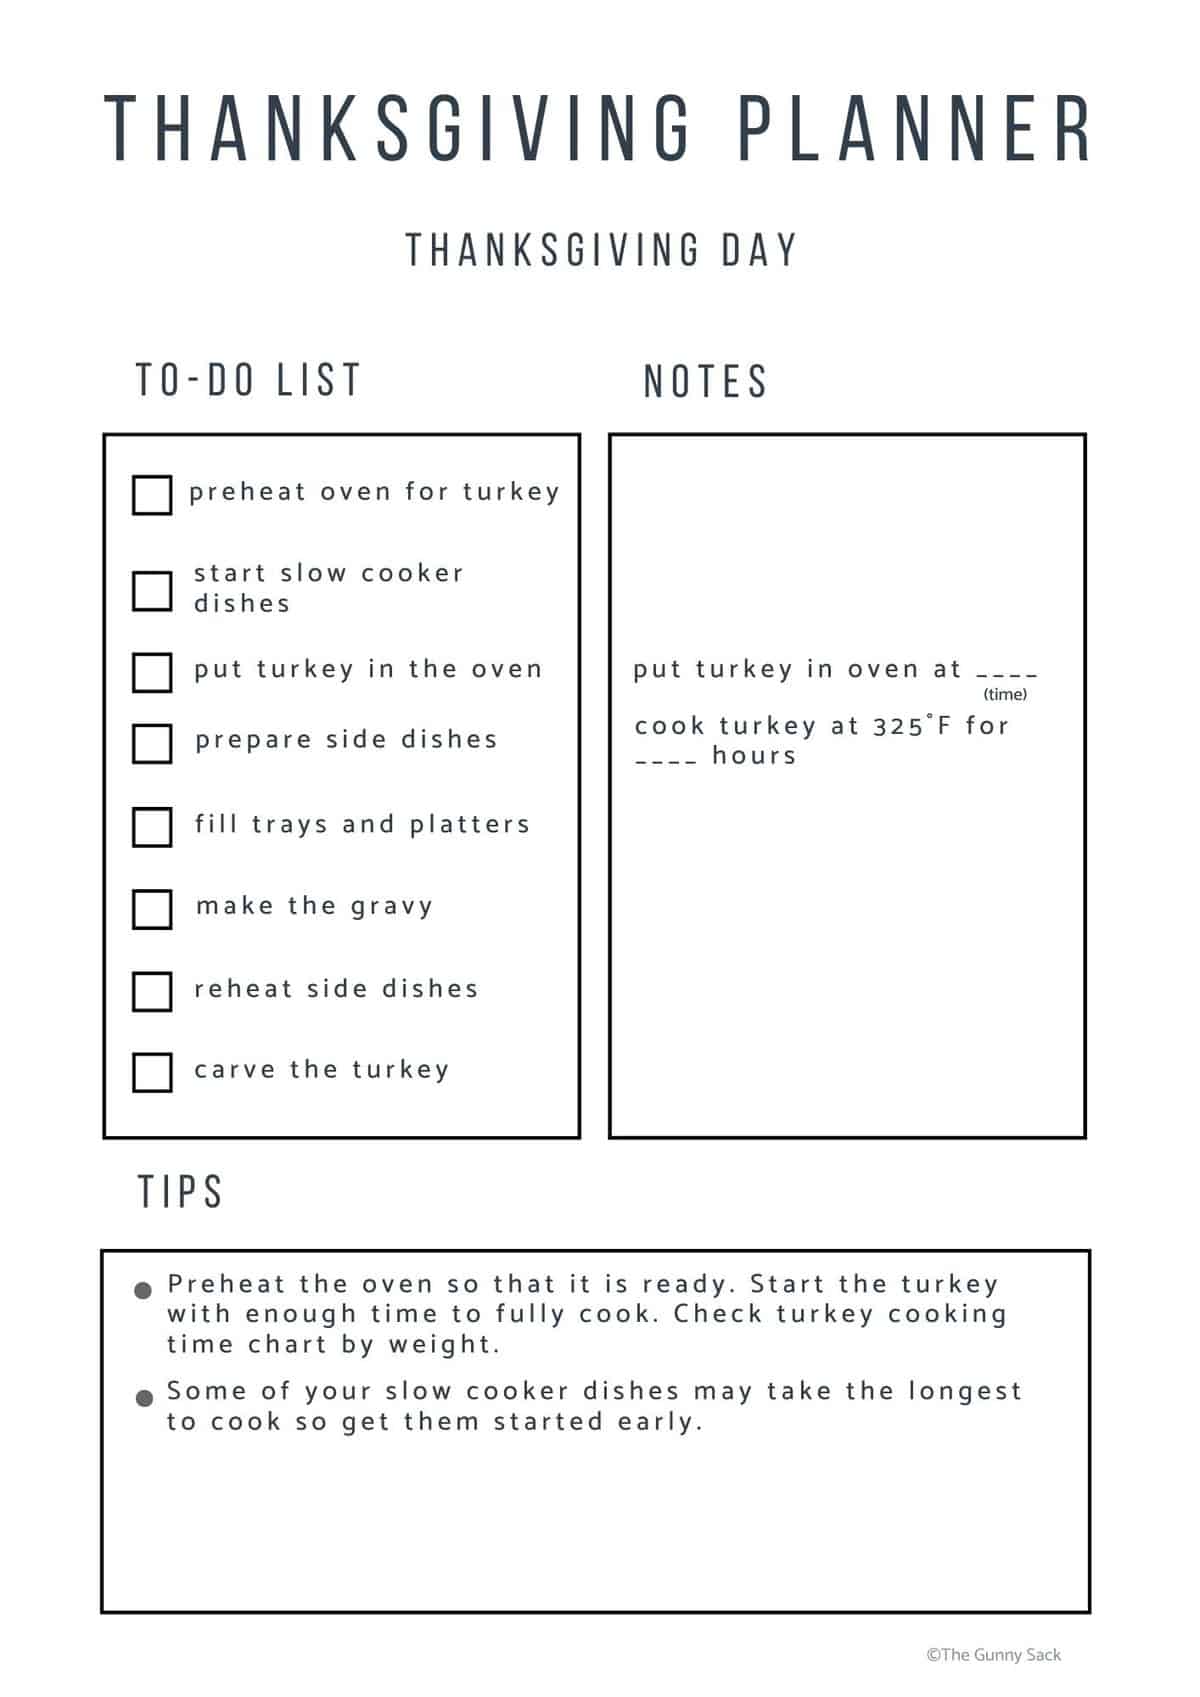 Thanksgiving Day page of planner.